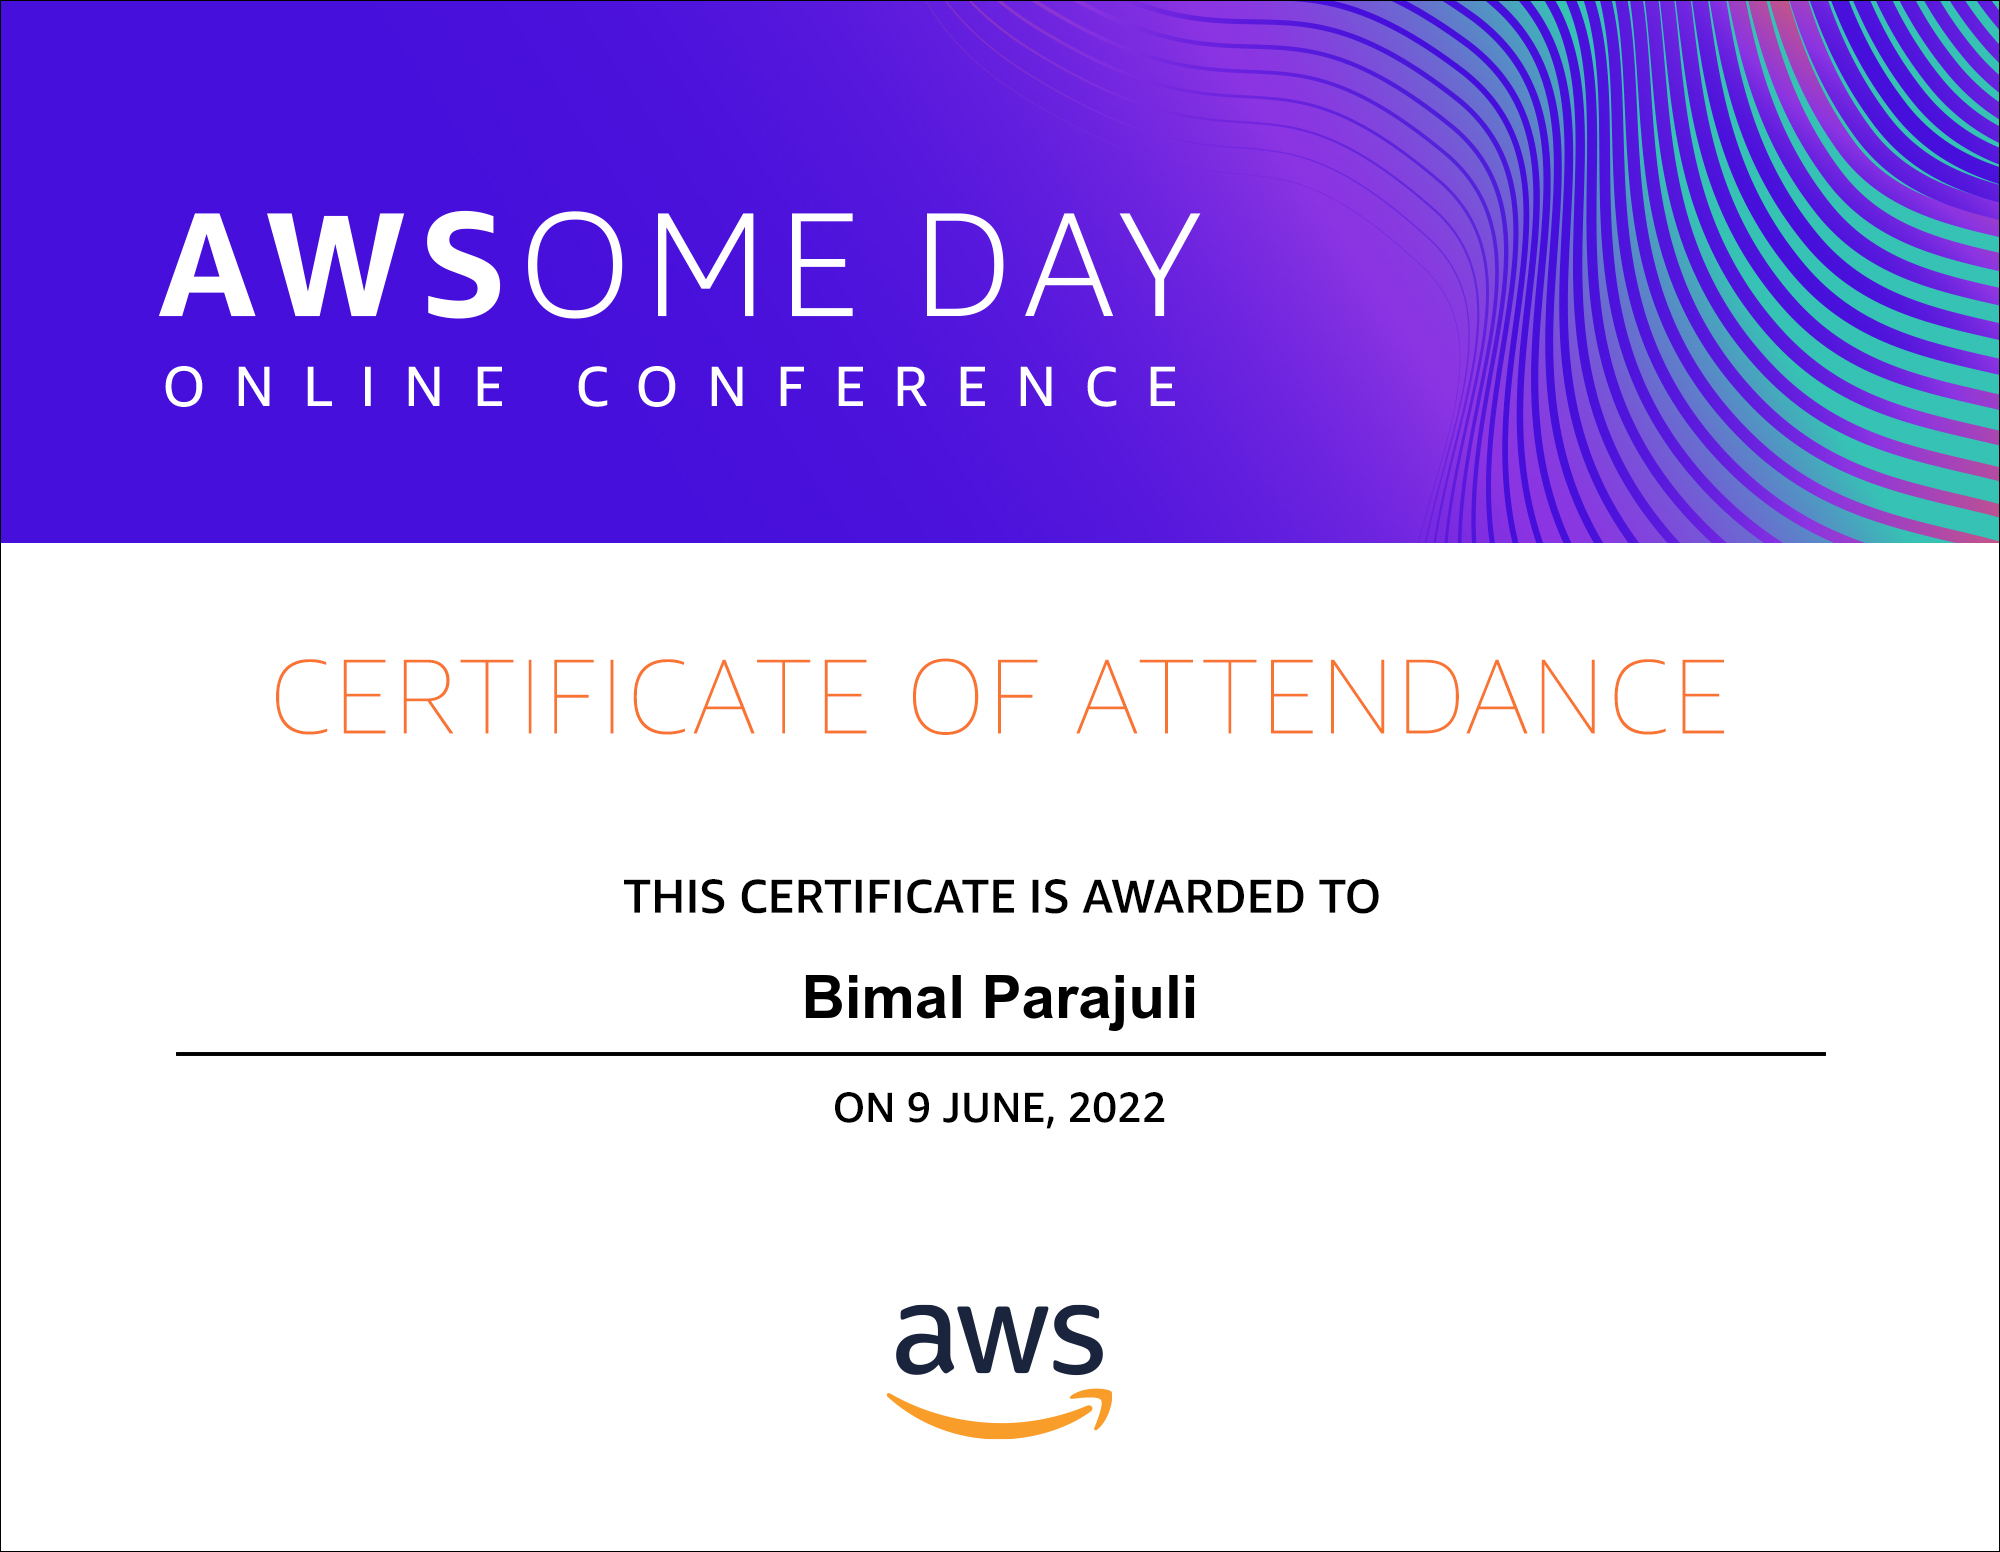 Certificate of participation in AWSome Day online Conference hosted by AWS.